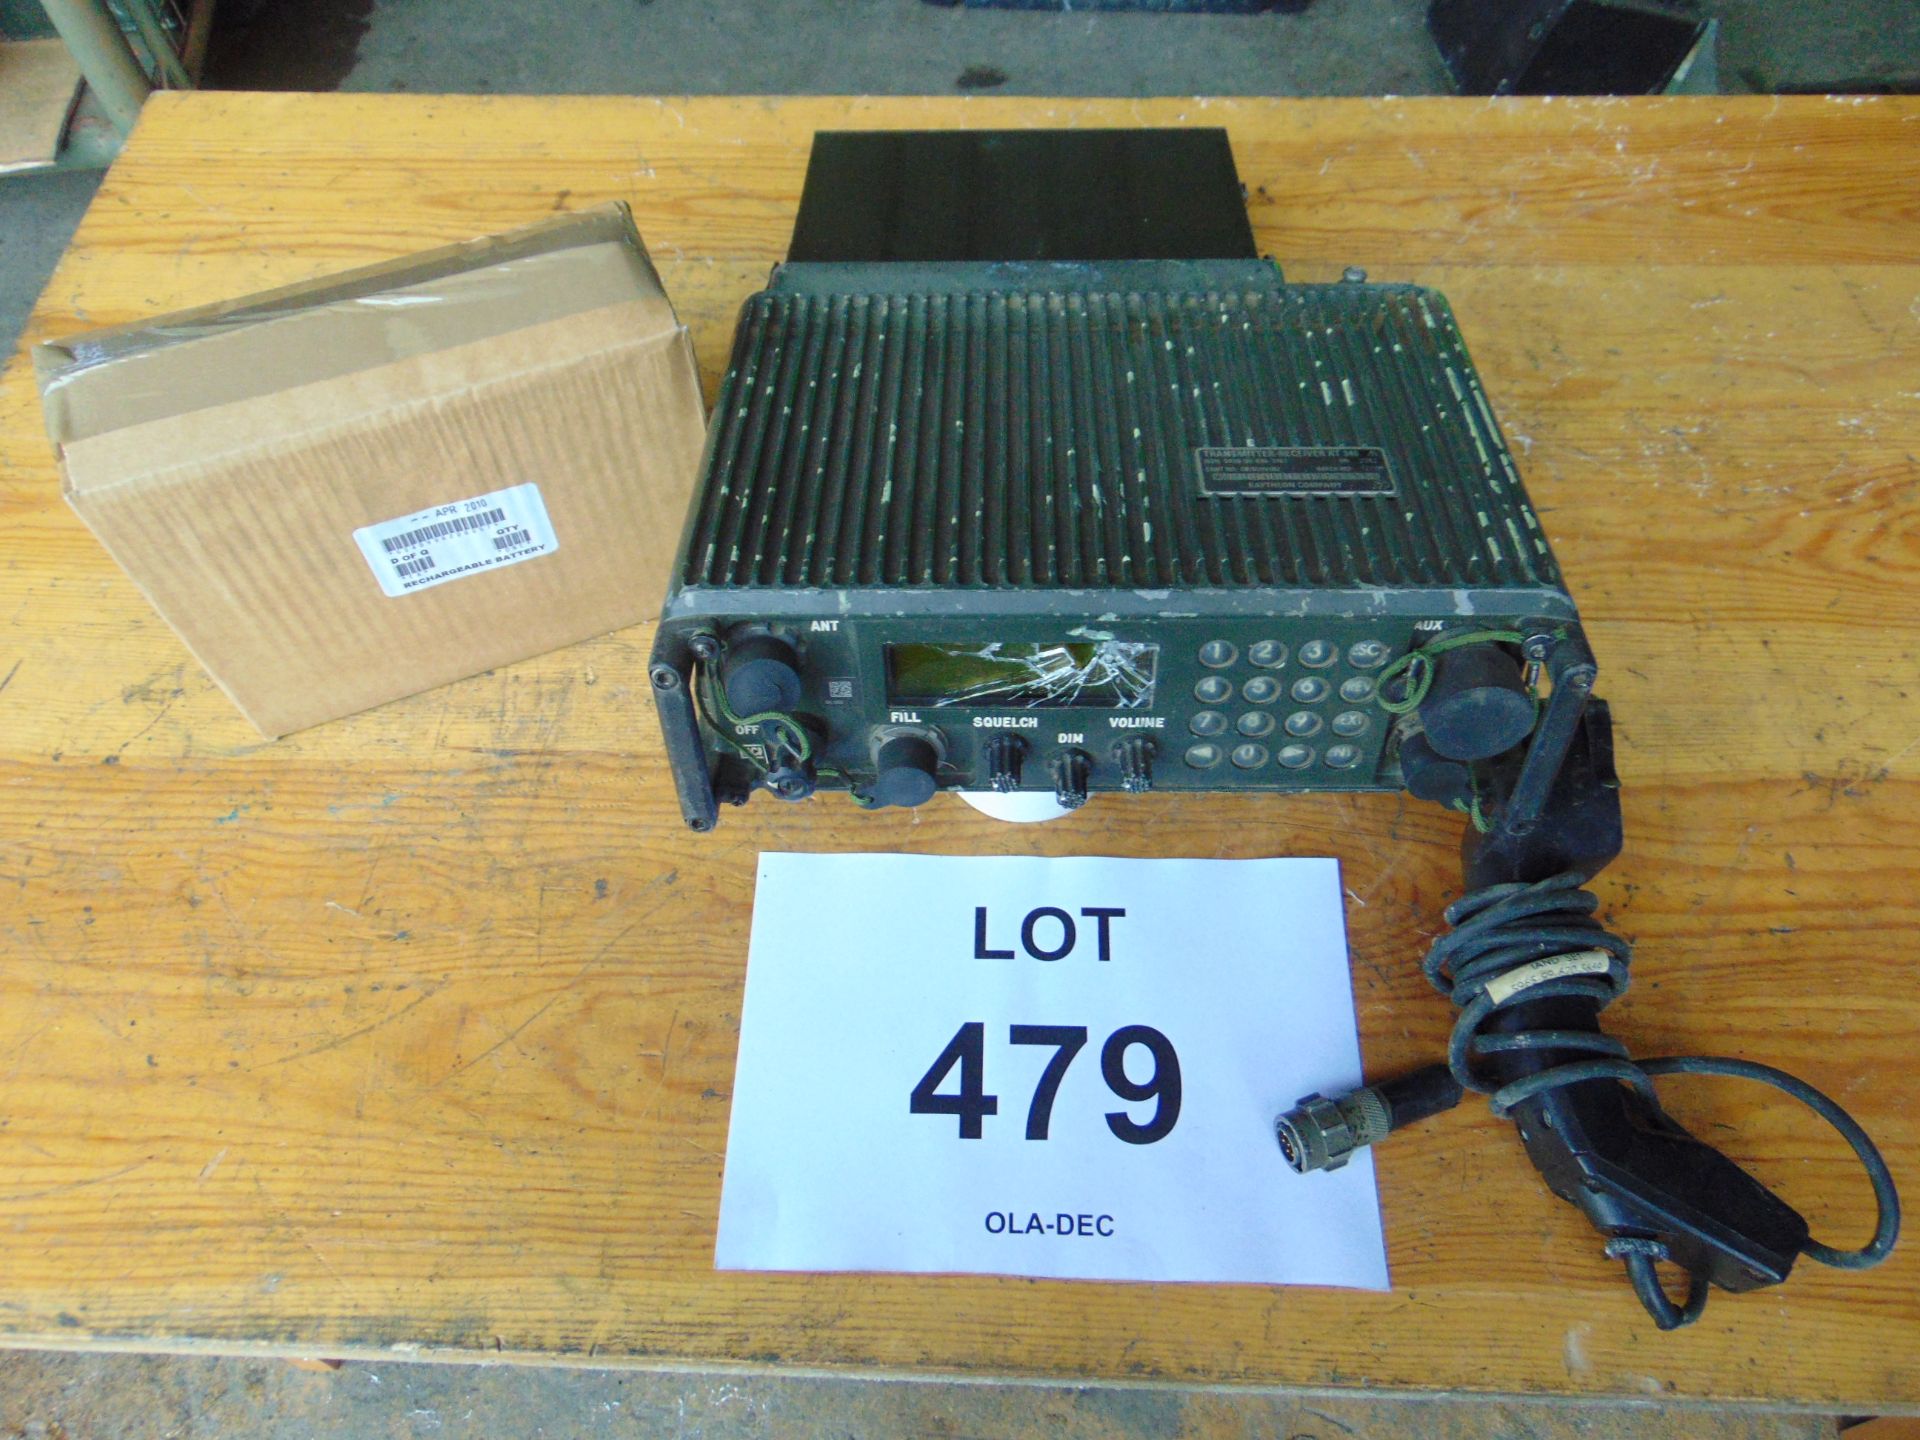 You are bidding on a Very Rare Raytheon Transmitter Receiver RT346 C/W 2 Batteries as shown. Glass